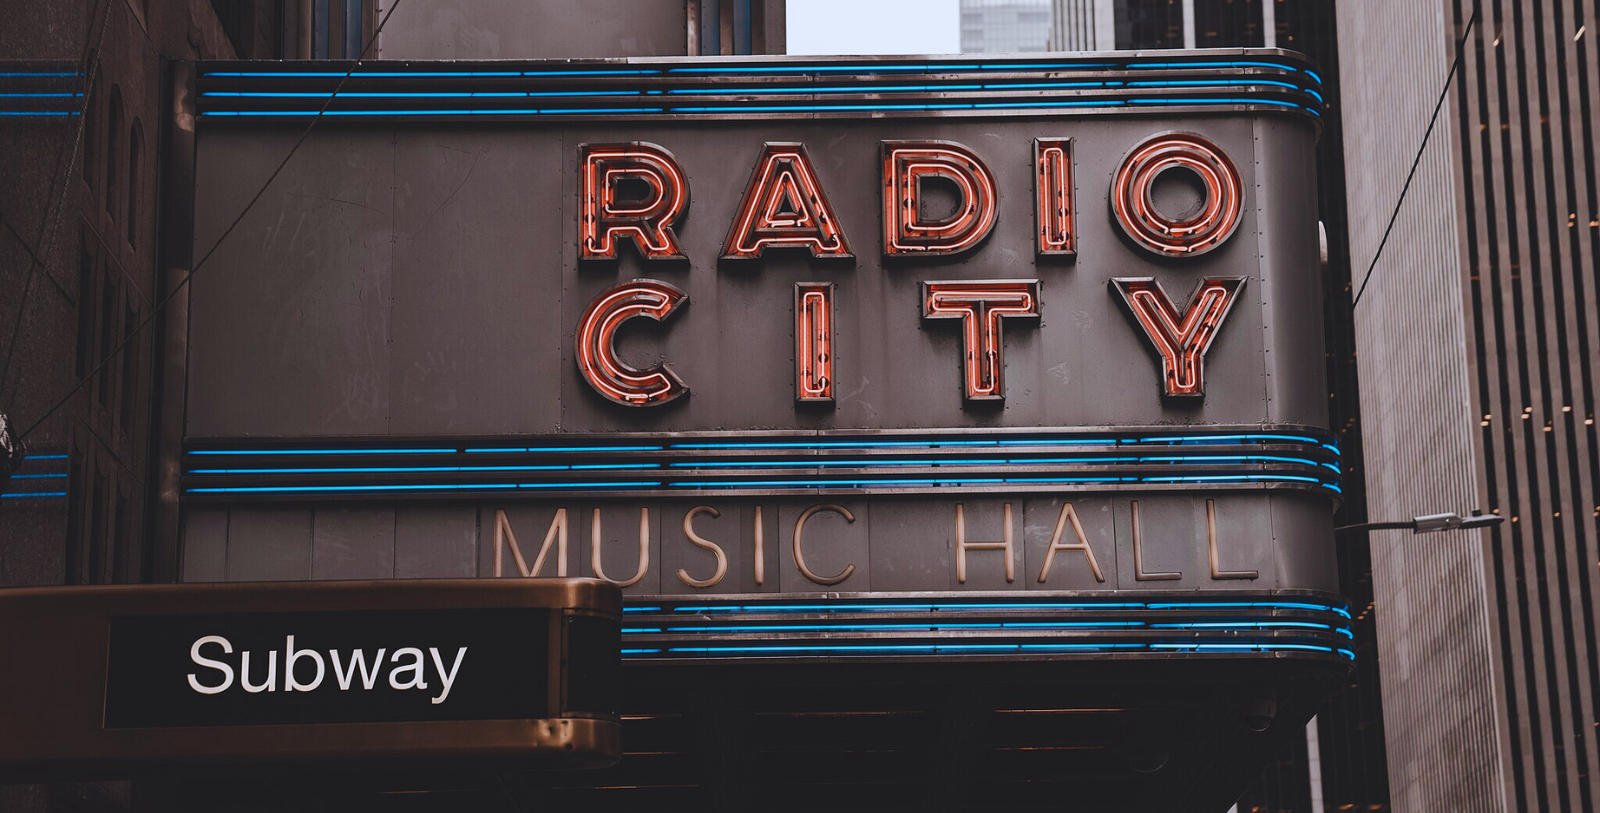 Experience New York City’s thriving creative scene with a live show in the Theatre District or at the historic Radio City Music Hall.